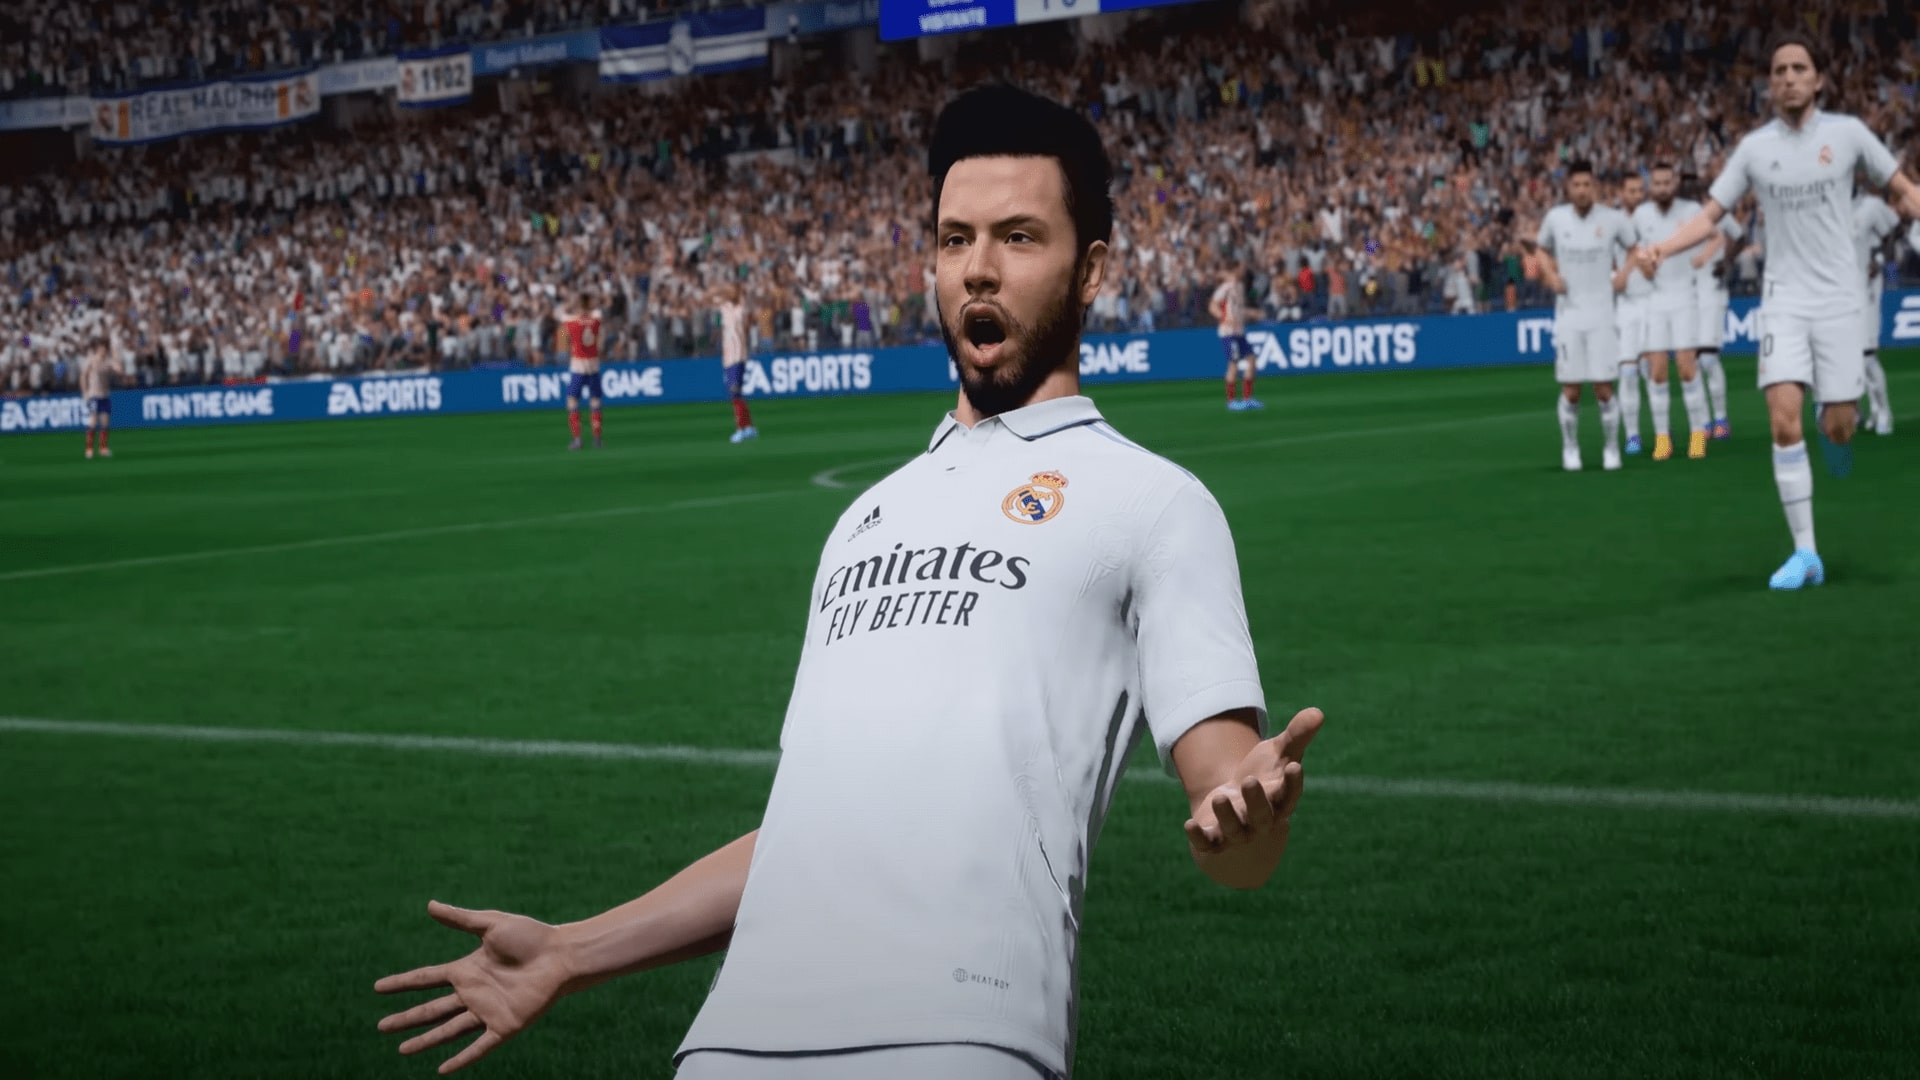 FIFA 23 Ultimate Team Game Mode Tips